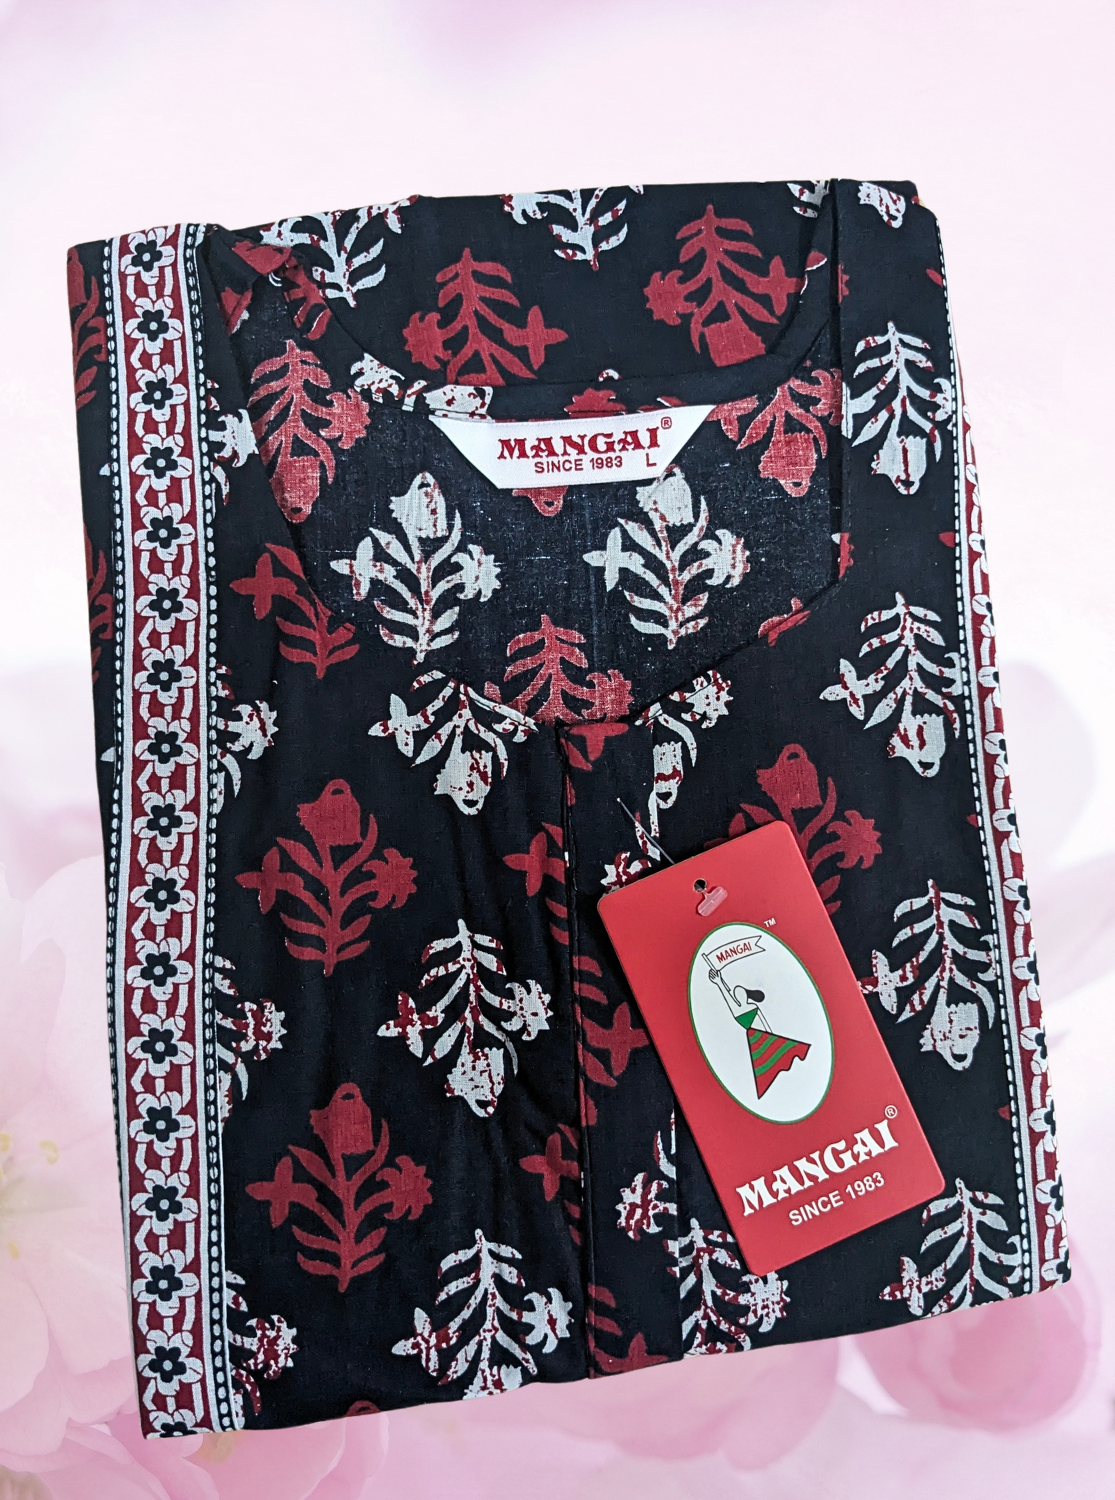 MANGAI Premium Cotton Maternity Wear for Pregnancy Women's | Soft Cotton | Above Knee Length Covered | Front Open Zipper| Beautiful Printed Maternity Wear